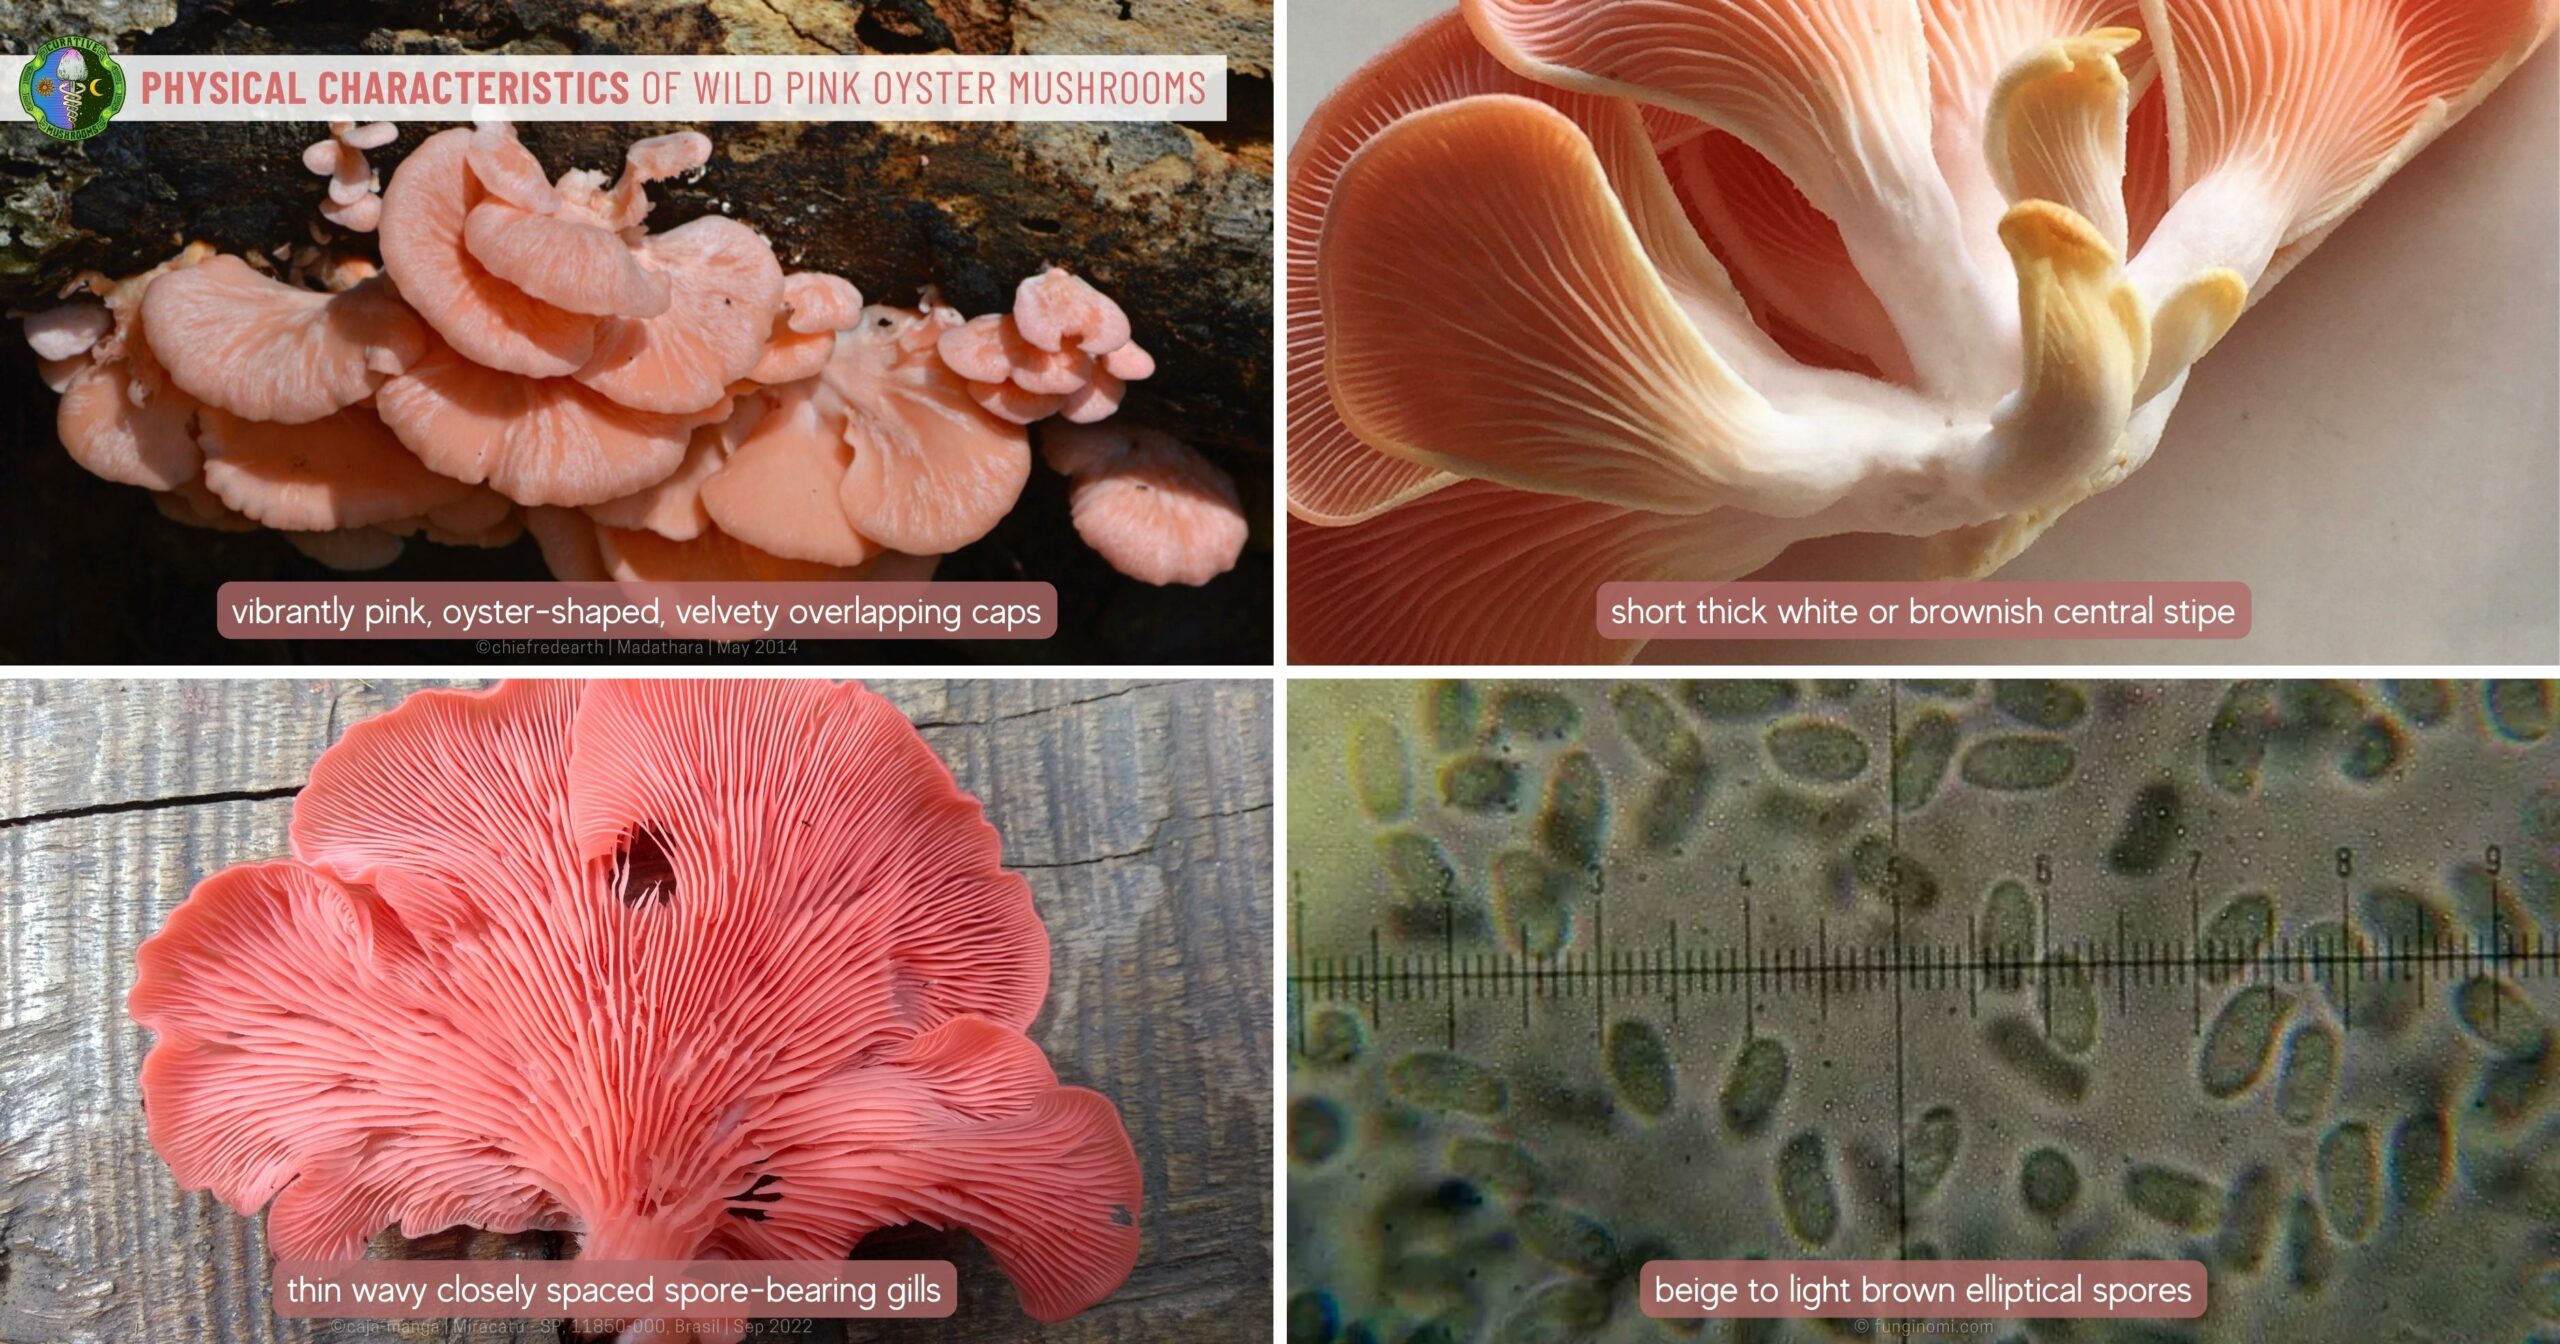 Physical Characteristics Wild Pink Oyster Mushrooms - vibrant pink fan caps - short thick stipe - wavy gills - beige light brown elliptical spores